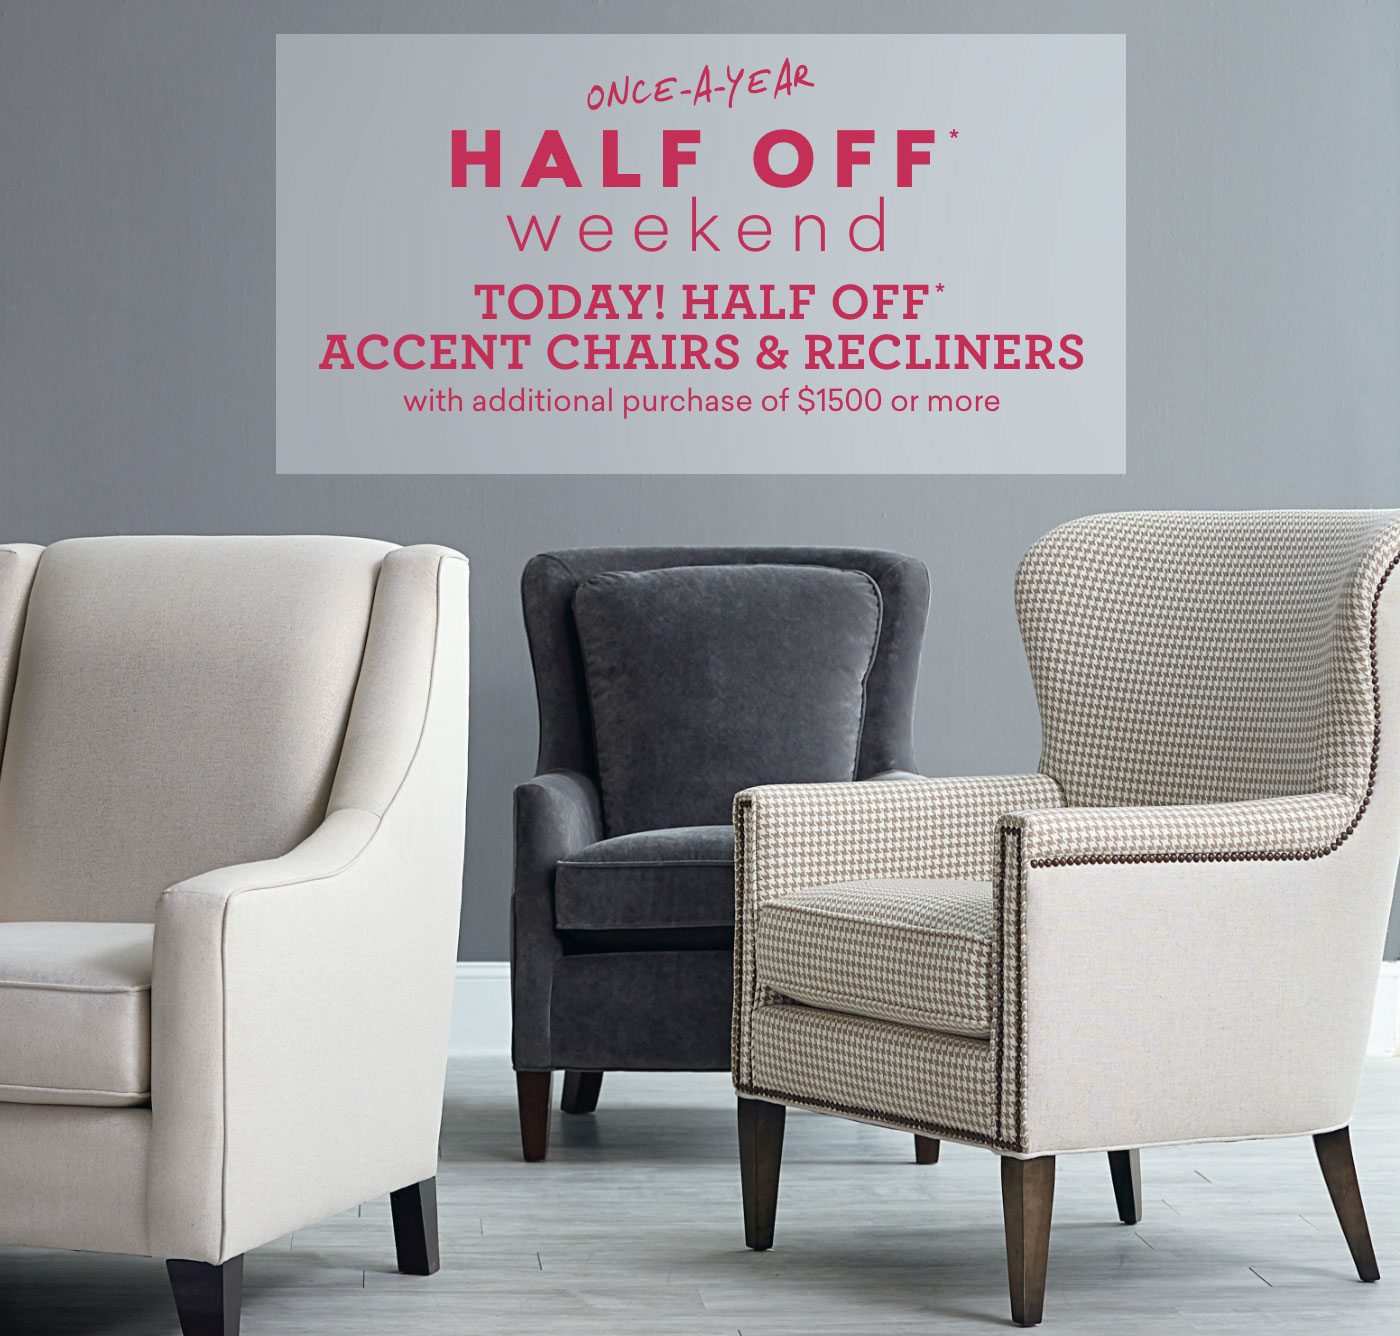 Today Only! Half Off Accent Chairs and Recliners.